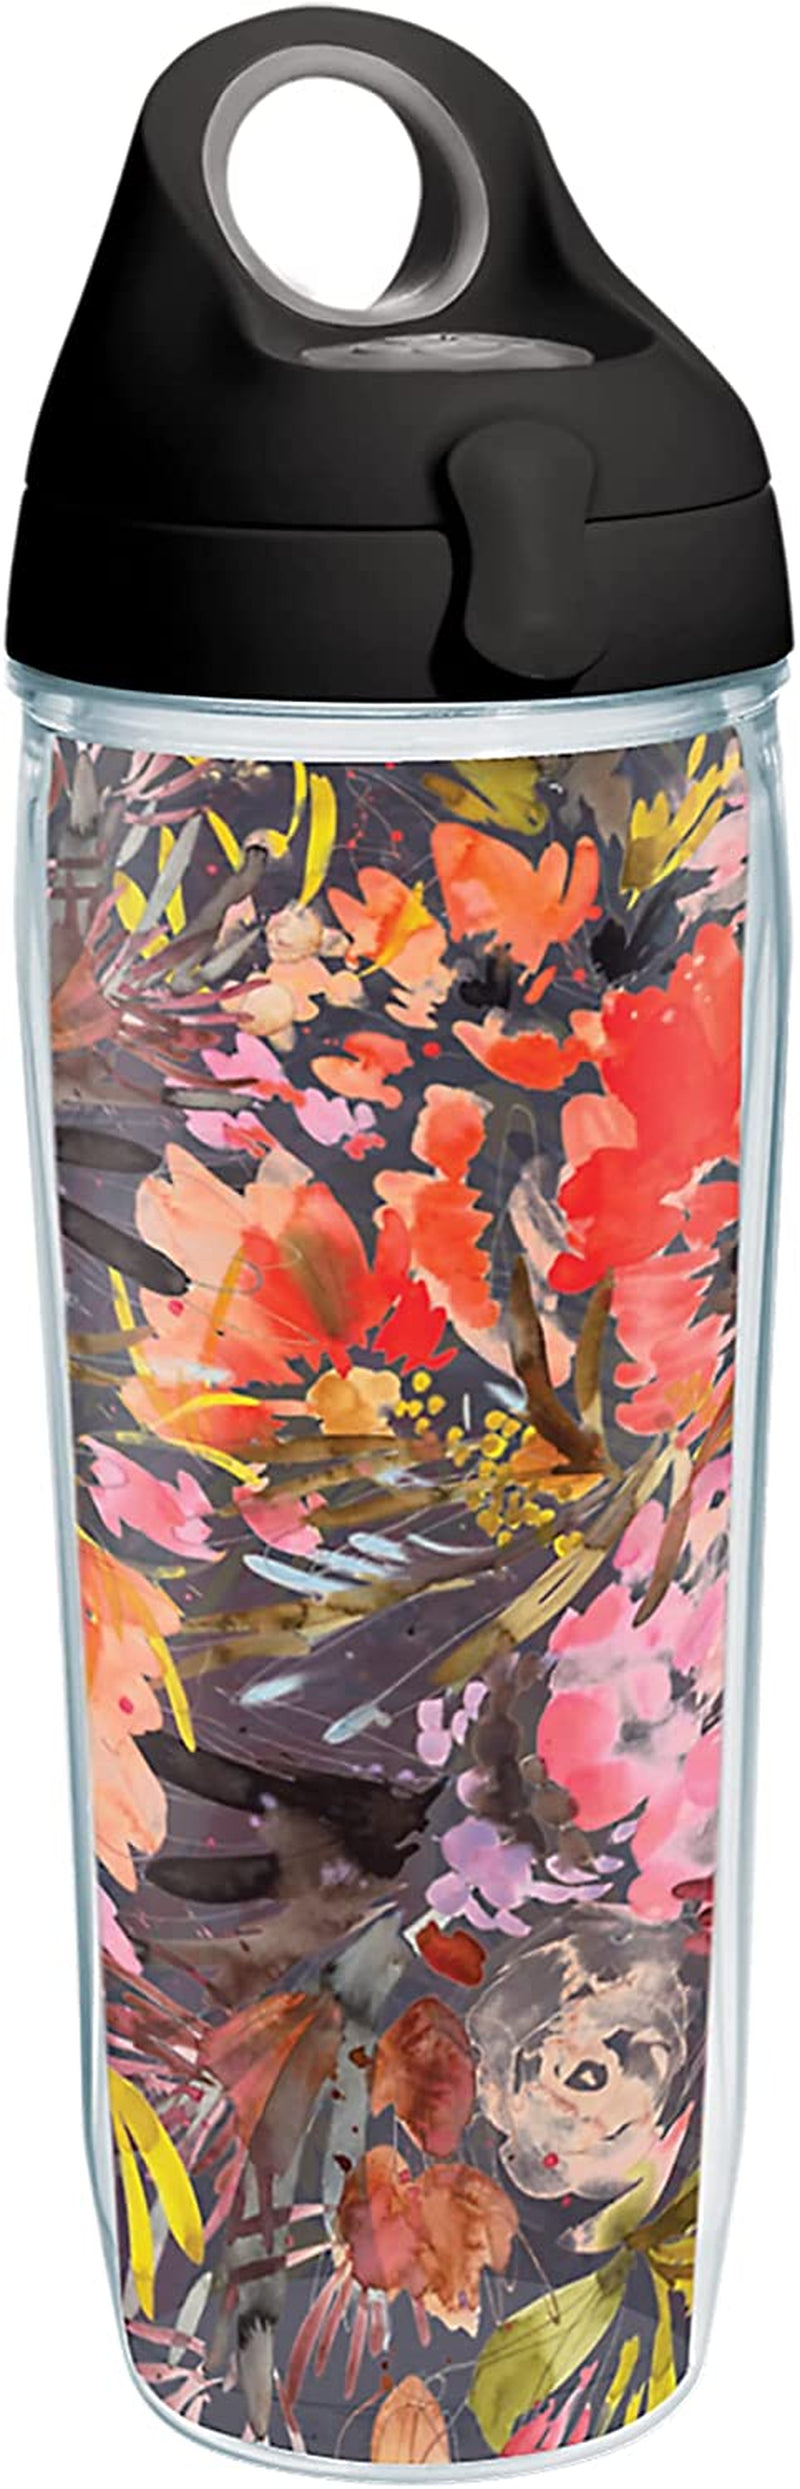 Tervis Made in USA Double Walled Kelly Ventura Floral Collection Insulated Tumbler Cup Keeps Drinks Cold & Hot, 16Oz 4Pk - Classic, Assorted Home & Garden > Kitchen & Dining > Tableware > Drinkware Tervis Bright Floral 24oz Water Bottle - Classic 